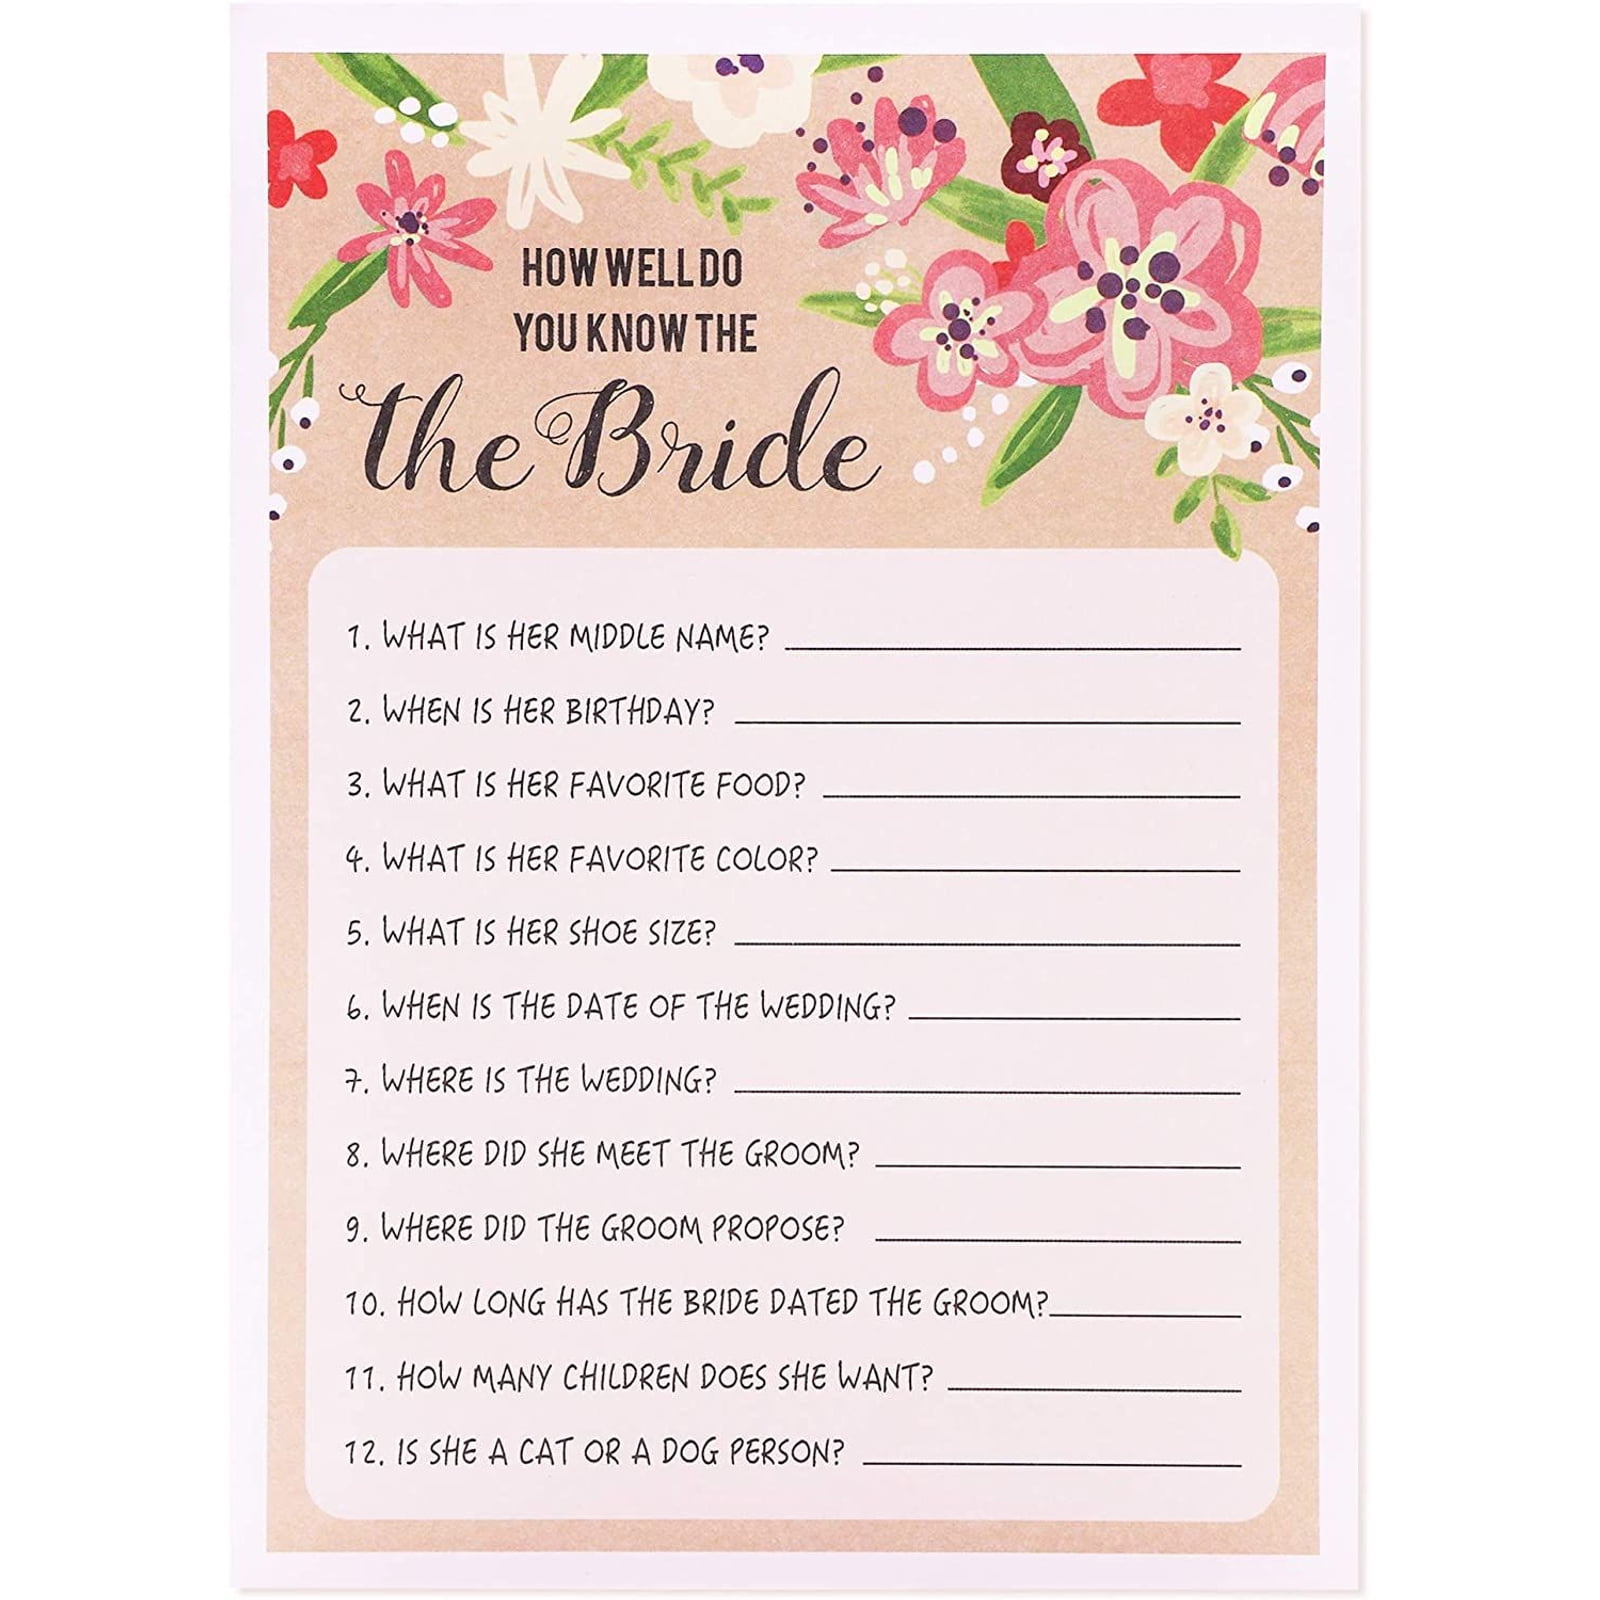 50 Wedding Advice Cards Date Night Idea Cards Bridal Shower Game Cards 